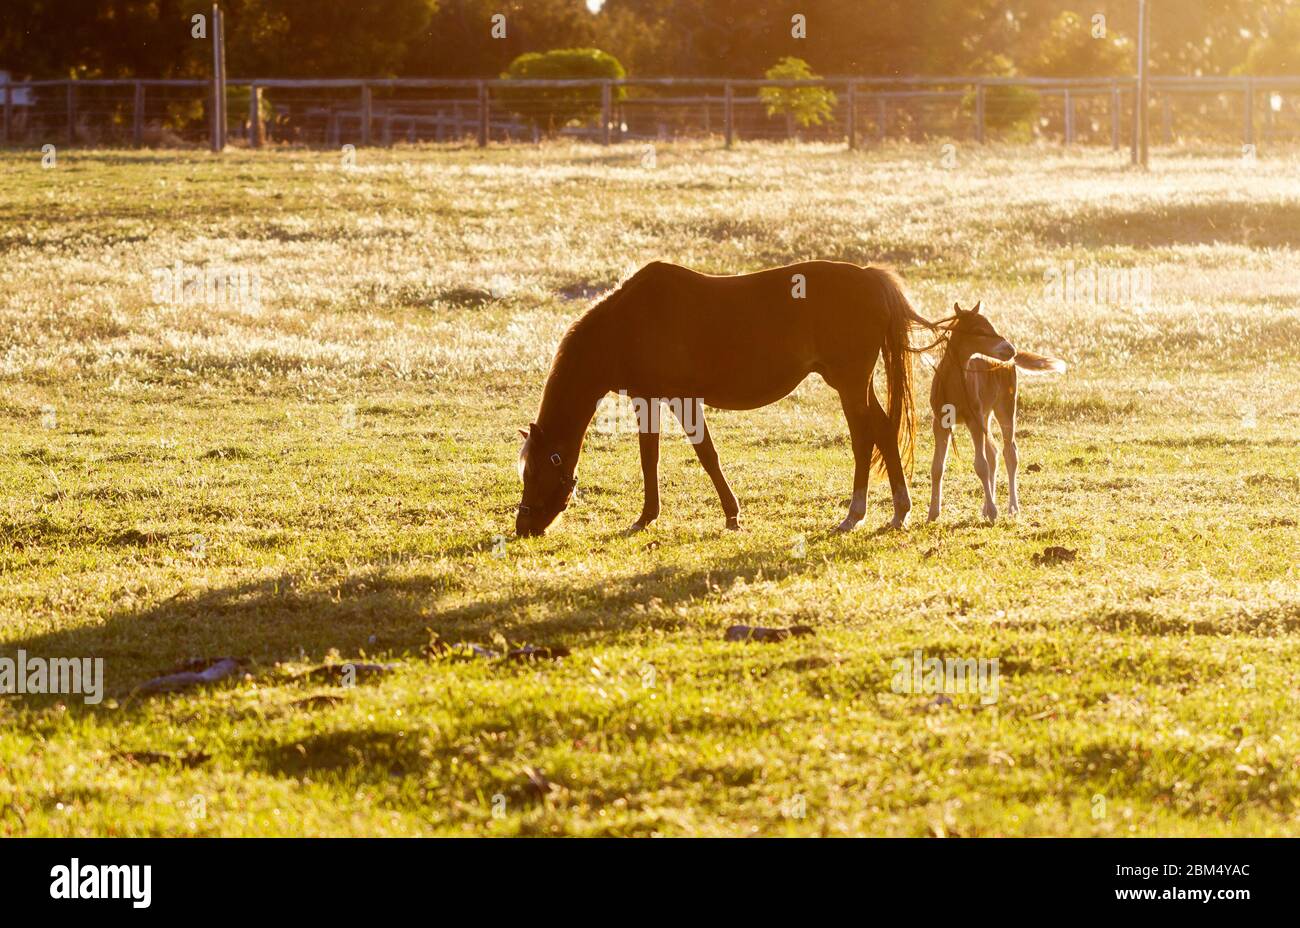 Horse and foal in a field lit by the afternoon sun. The foal is entangled in the mare's tail Stock Photo